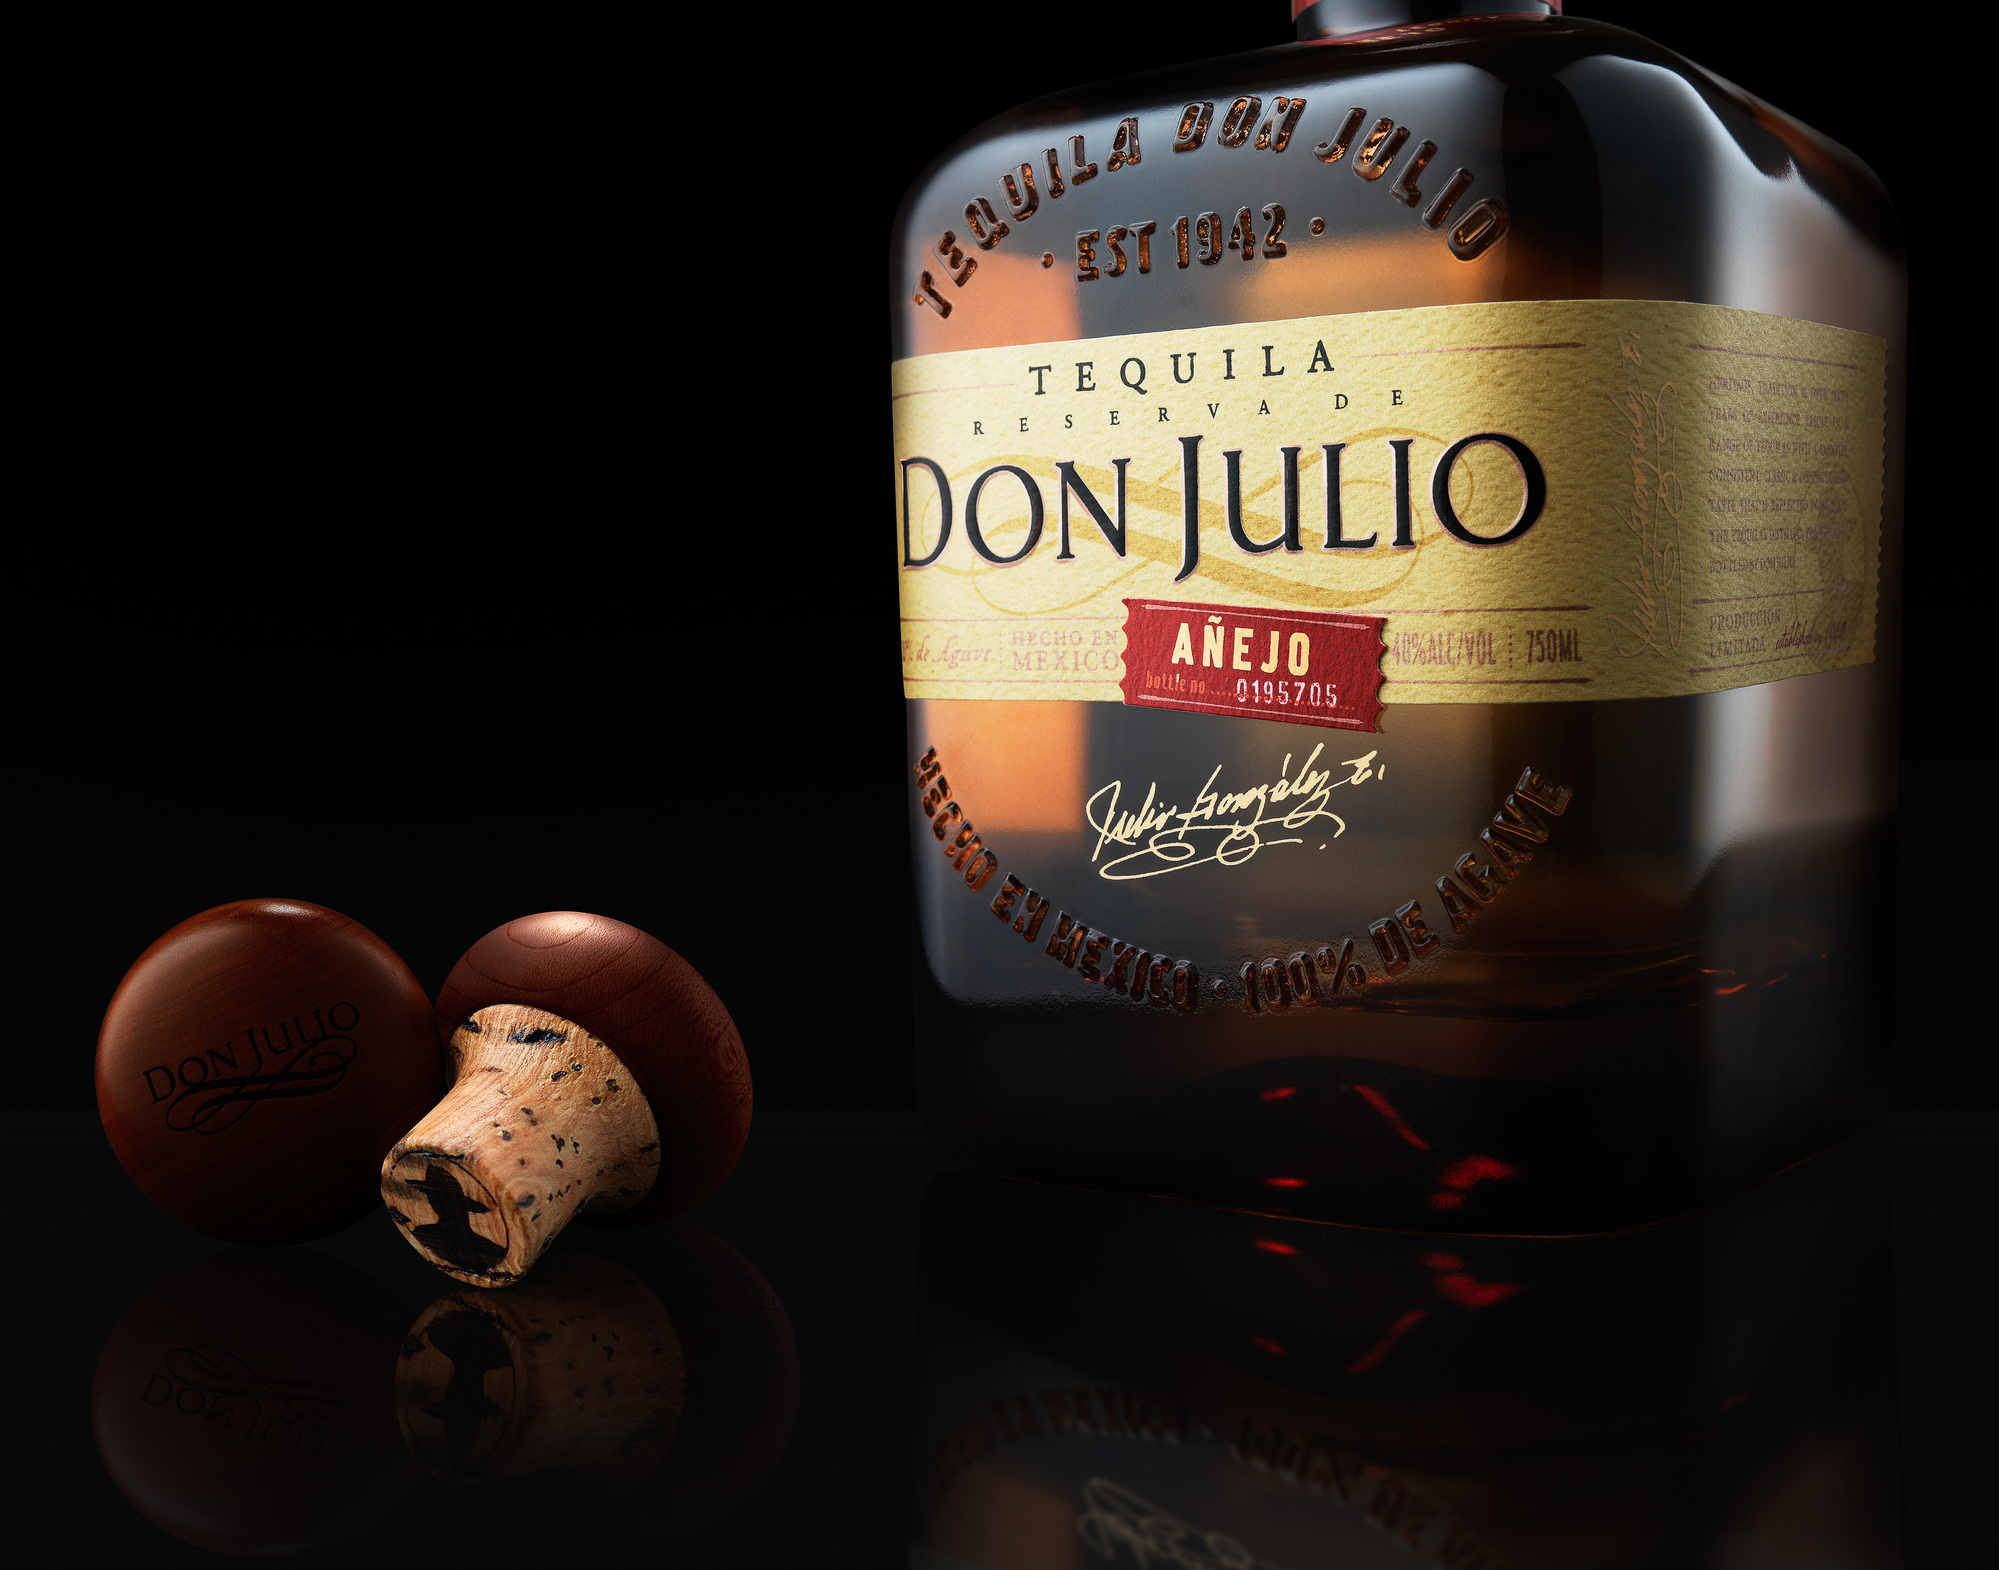 Don Julio Tequila Anejo. Beverages and liquids product & advertising photography by Timothy Hogan Studio in Los Angeles